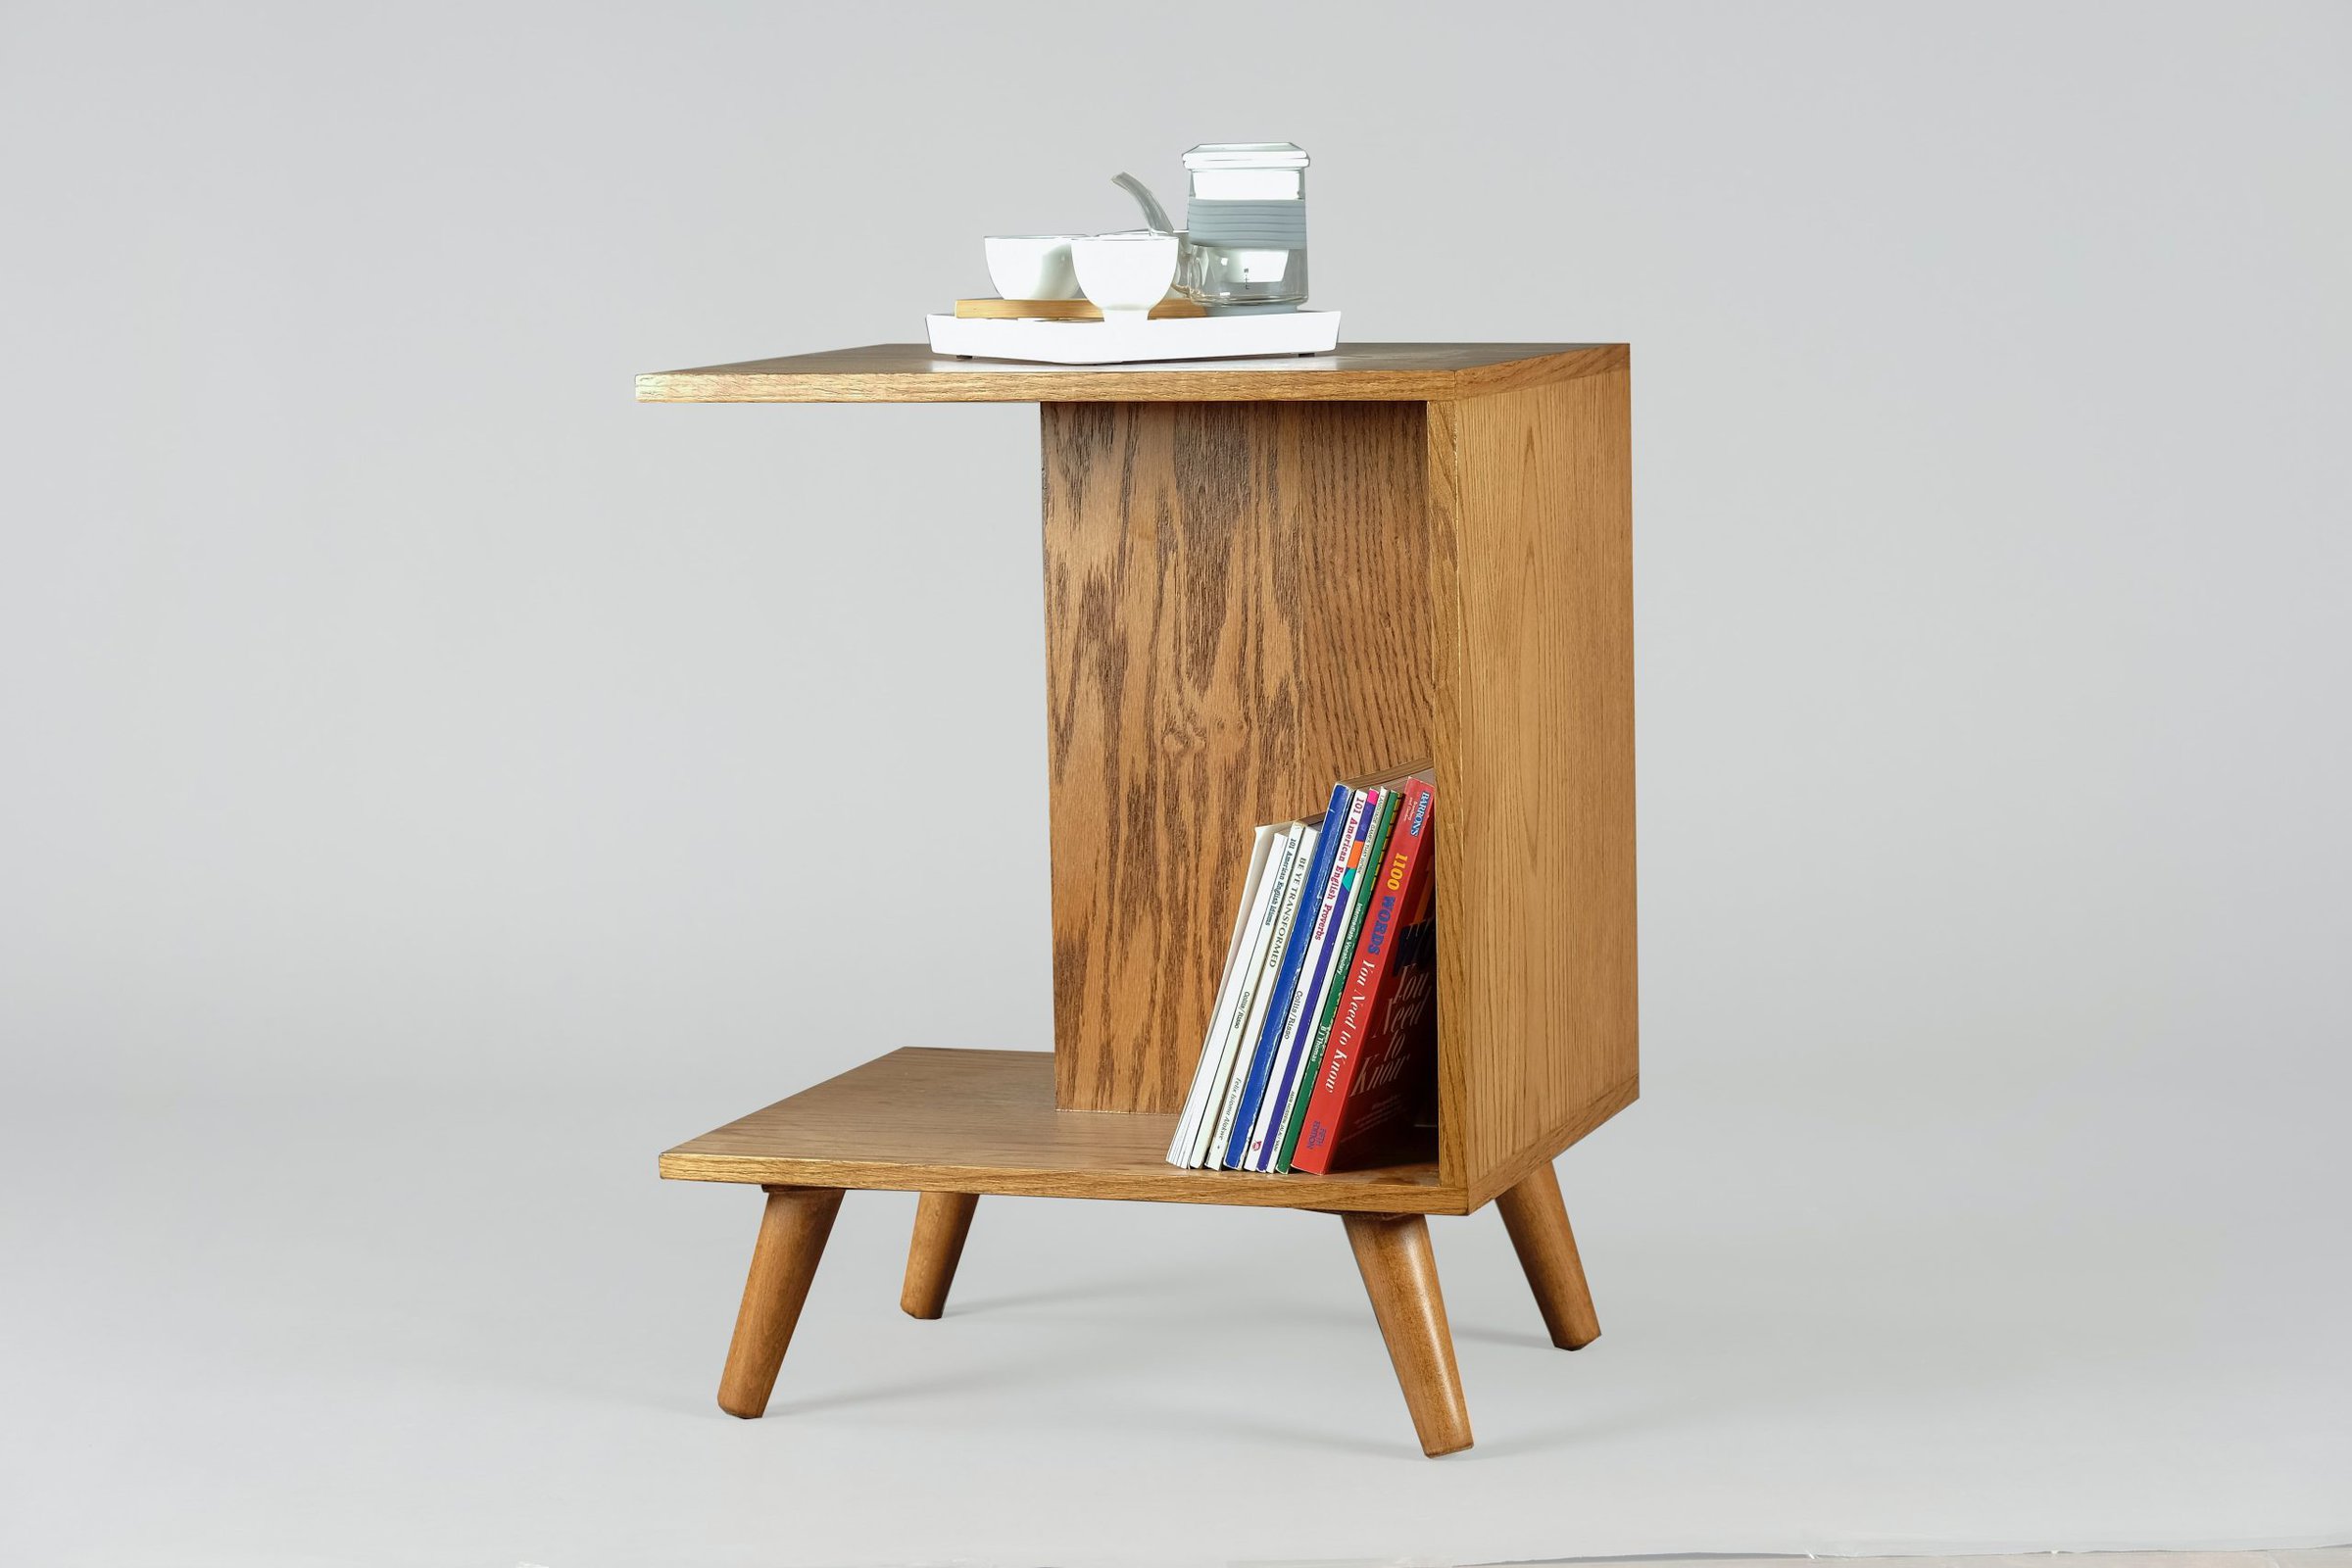  Quirky Wood Table scaled